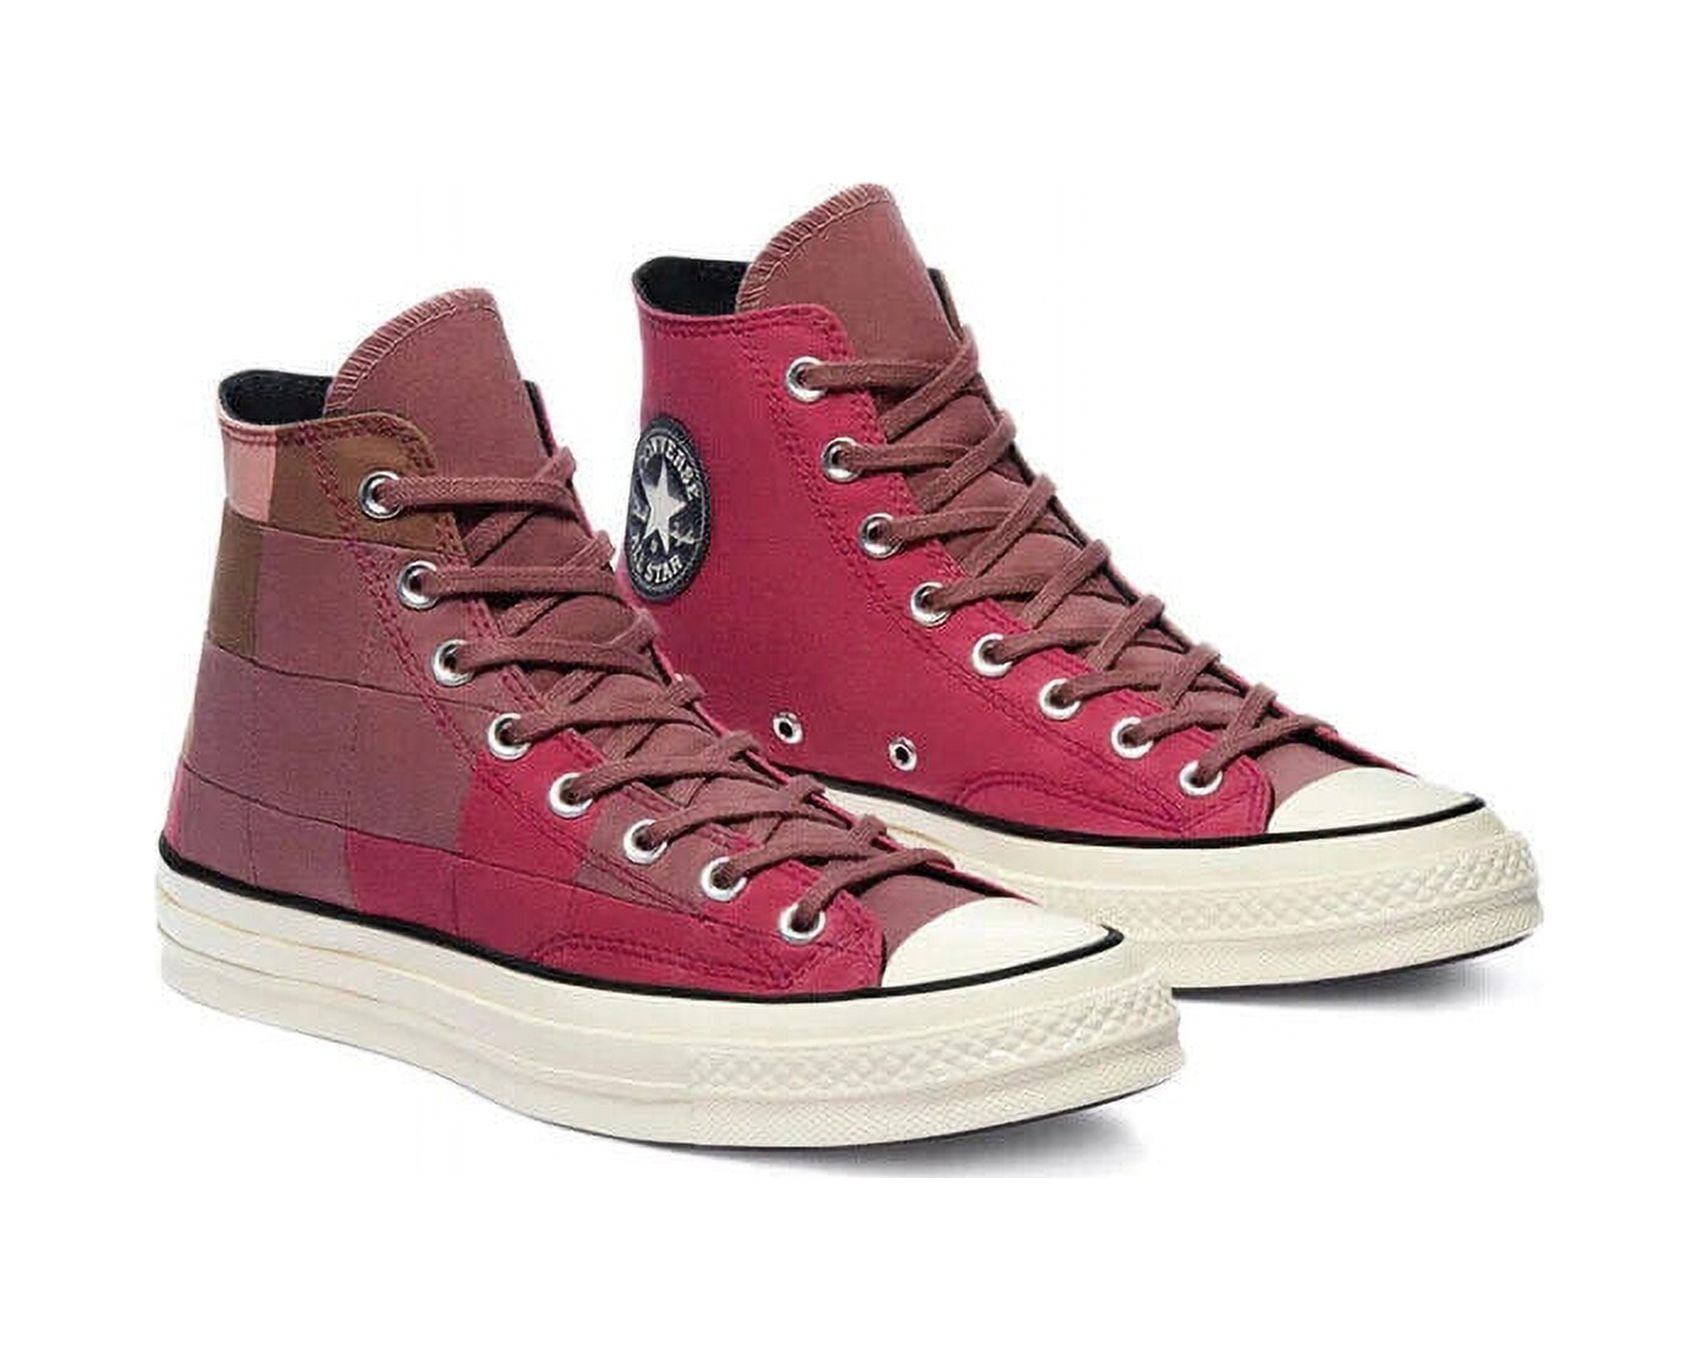 Converse Brown Fashion Sneakers for Men